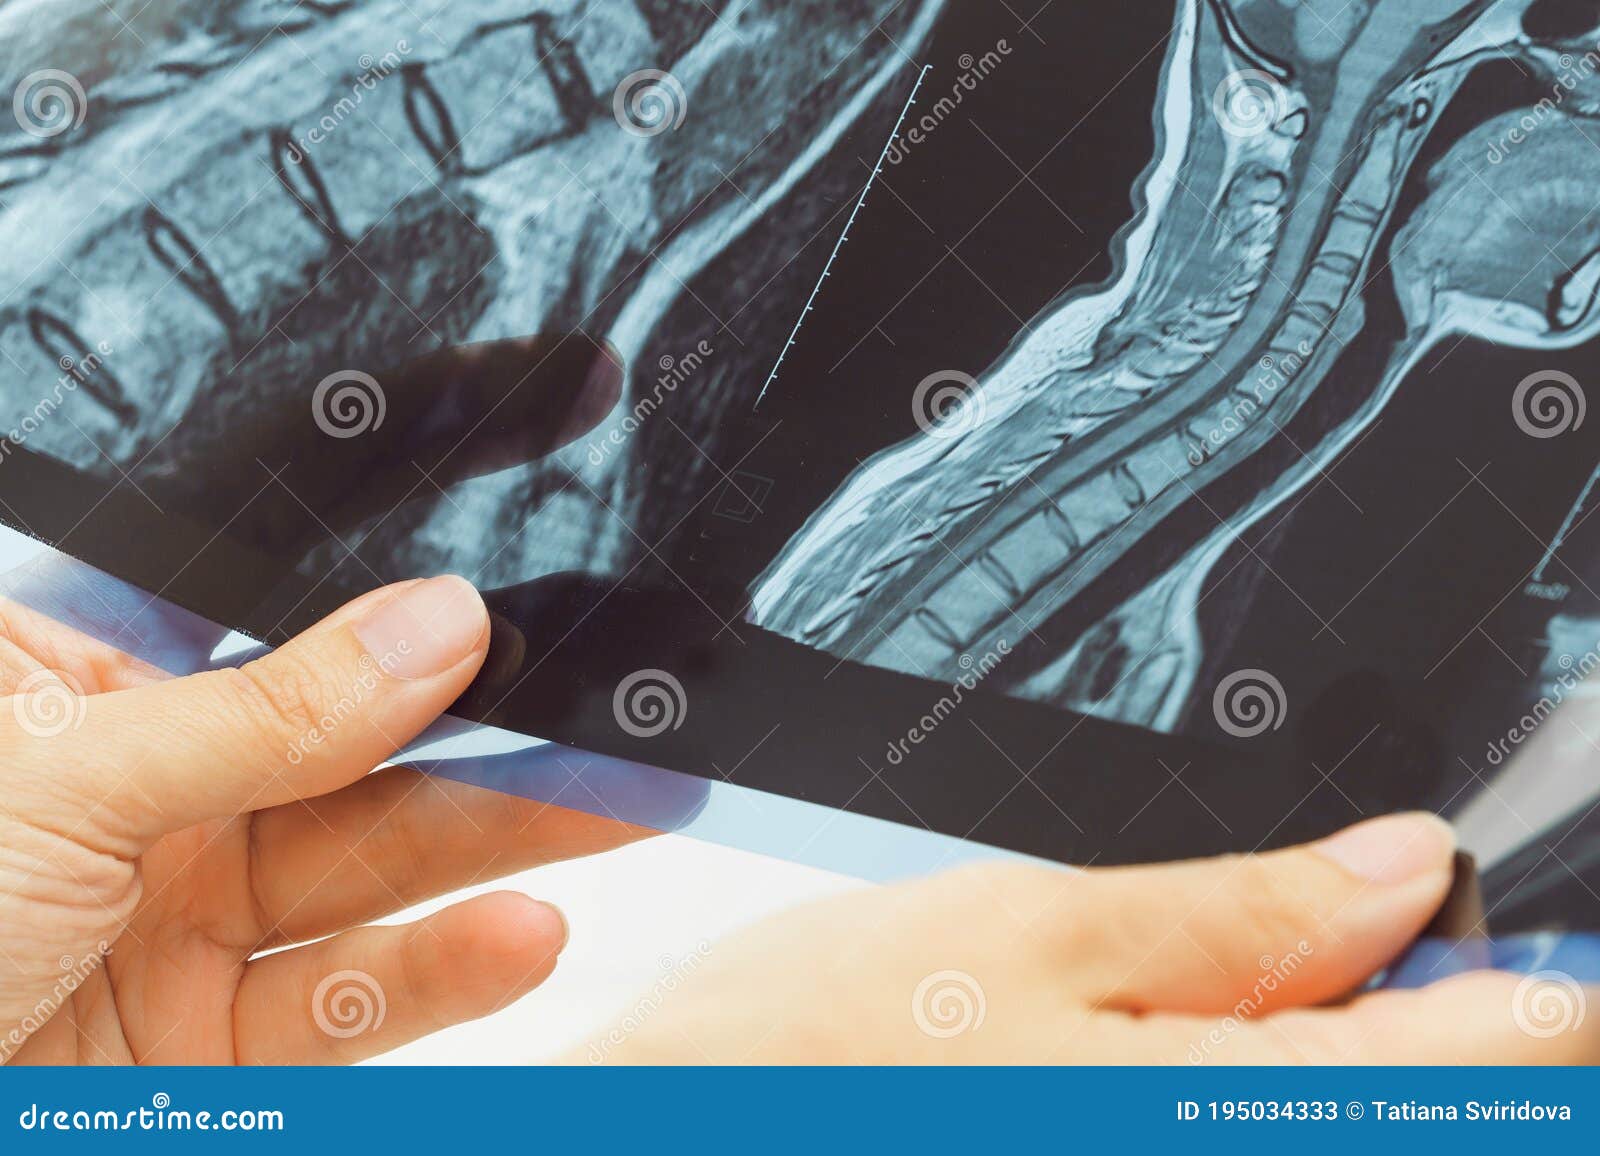 female doctors hand pointing at x-ray medical imaging at a shoulder condition